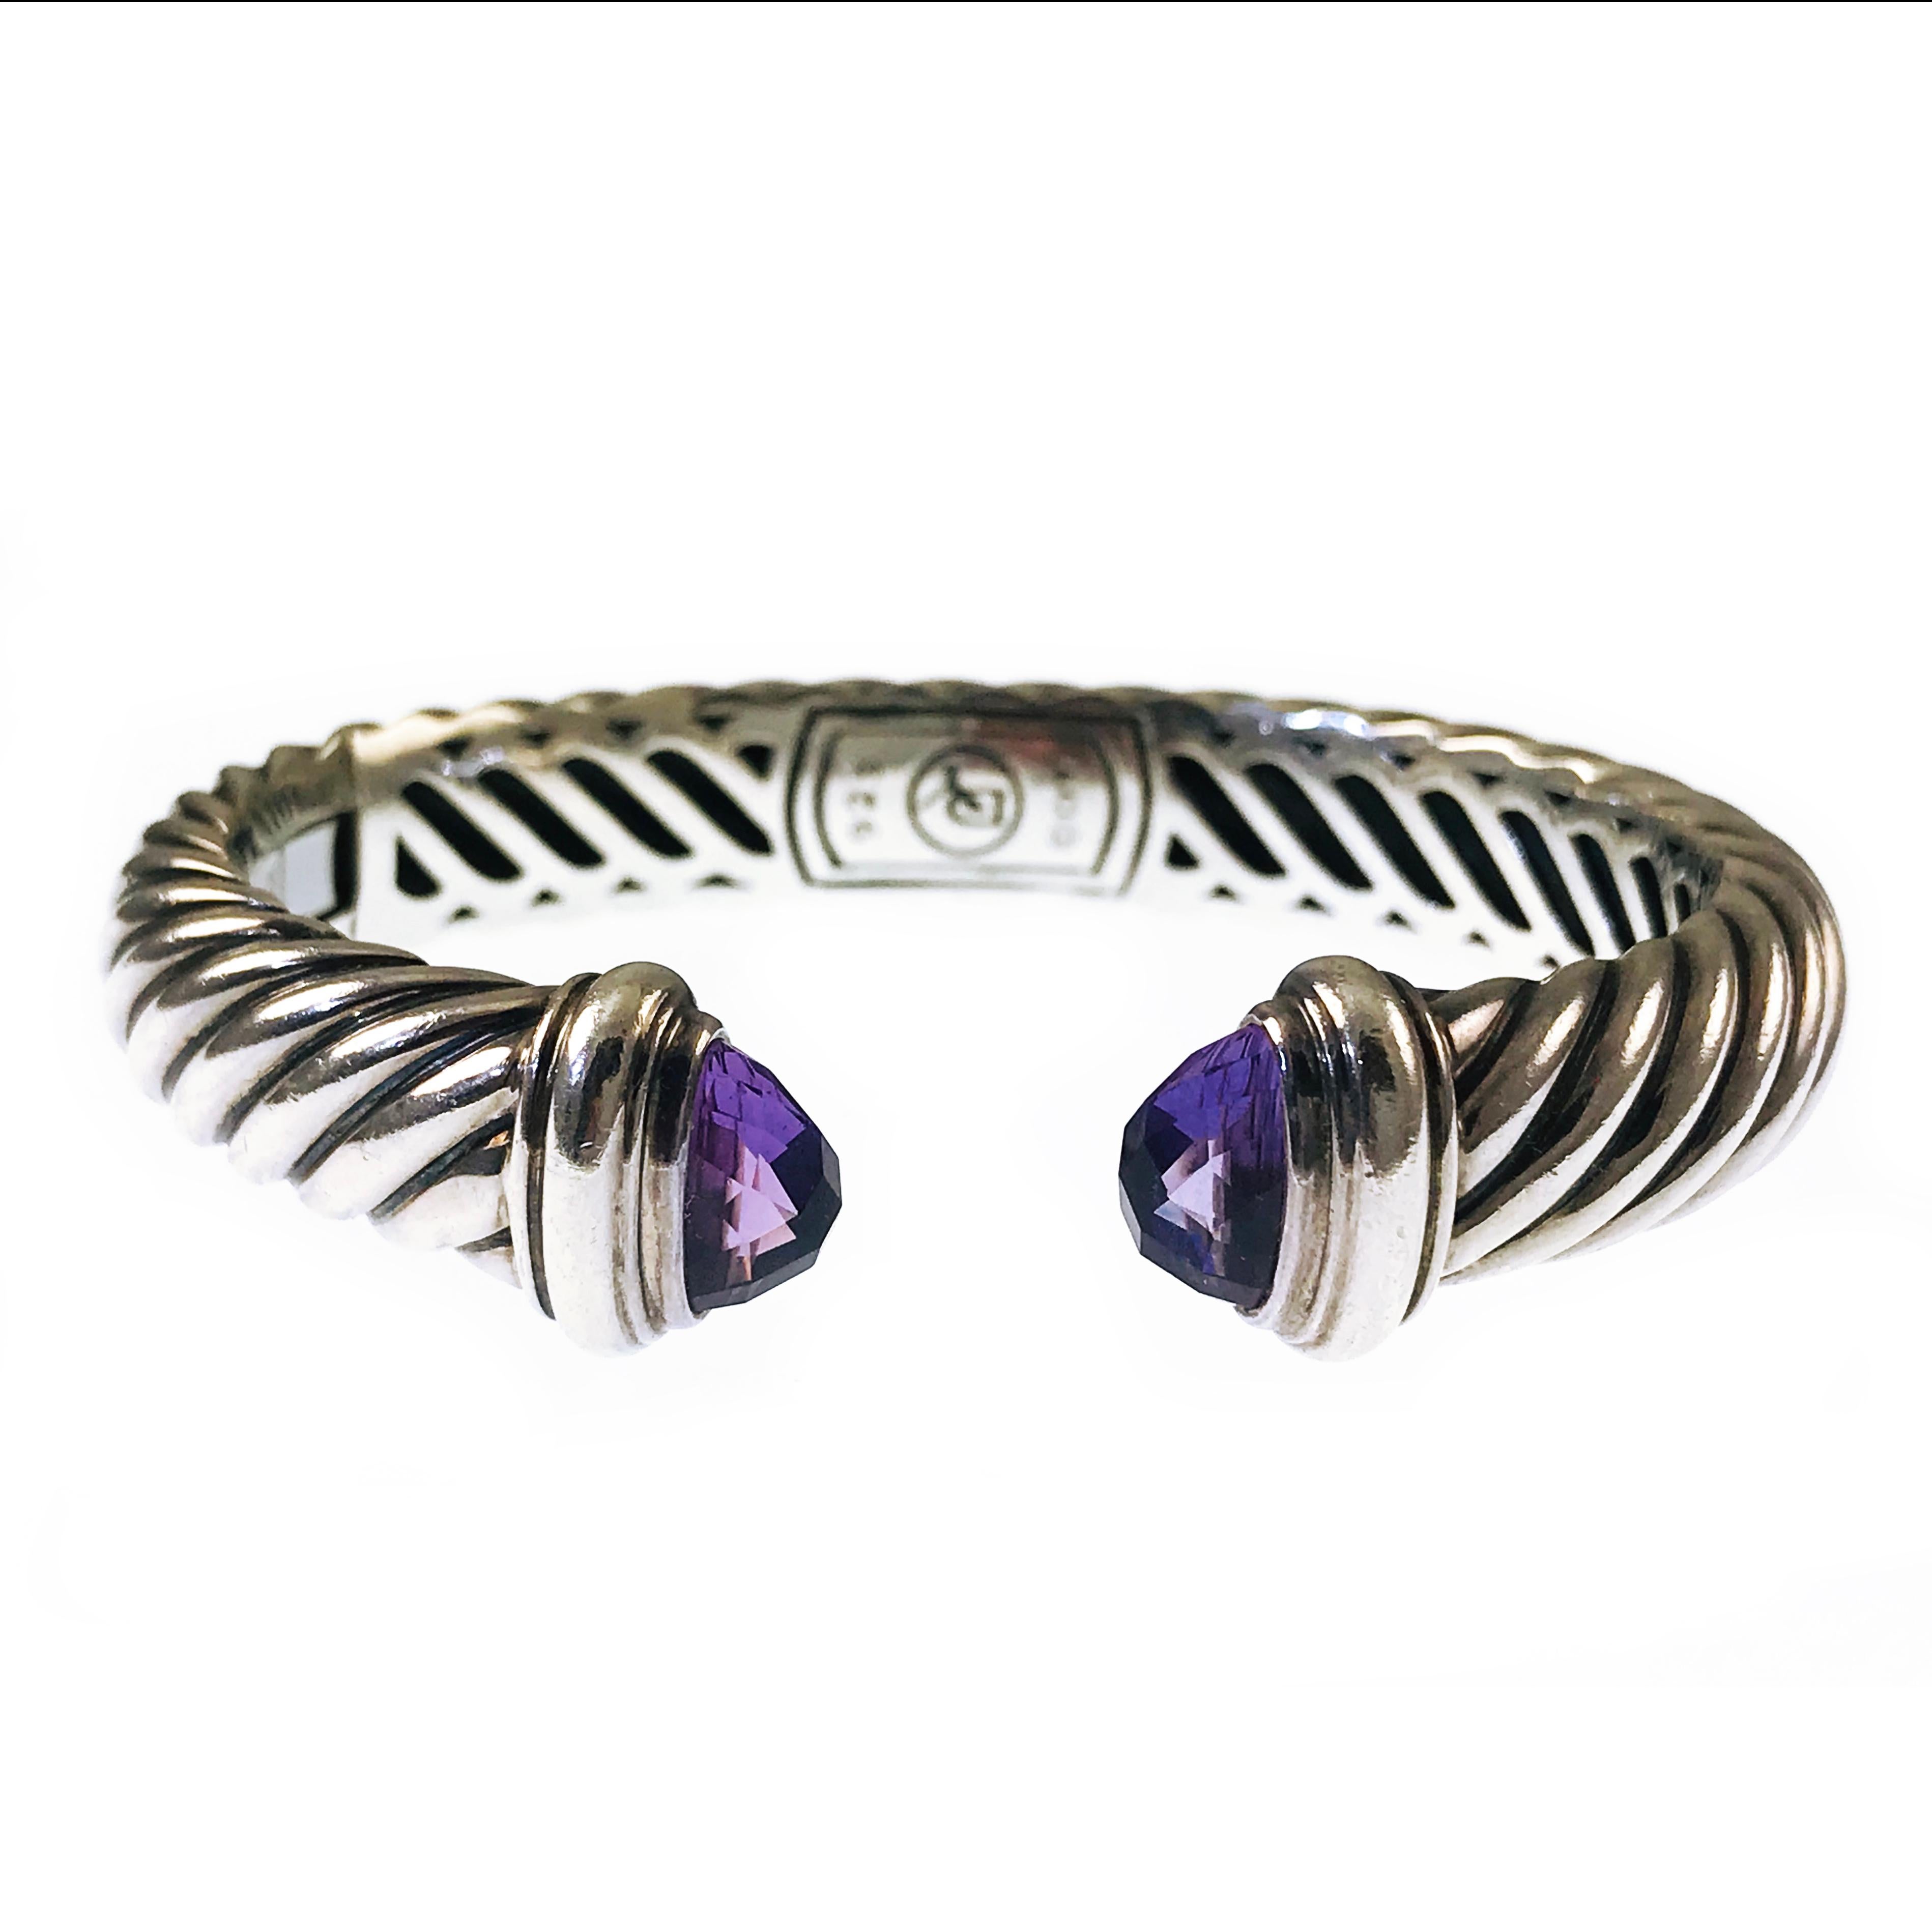 David Yurman Waverly Sterling Silver Amethyst Cable Cuff Bracelet. The classic cable design element creates movement, texture, and depth, the ends contain a faceted Amethyst stone for a sparkly accent. Stamped on the center of the inside of the cuff